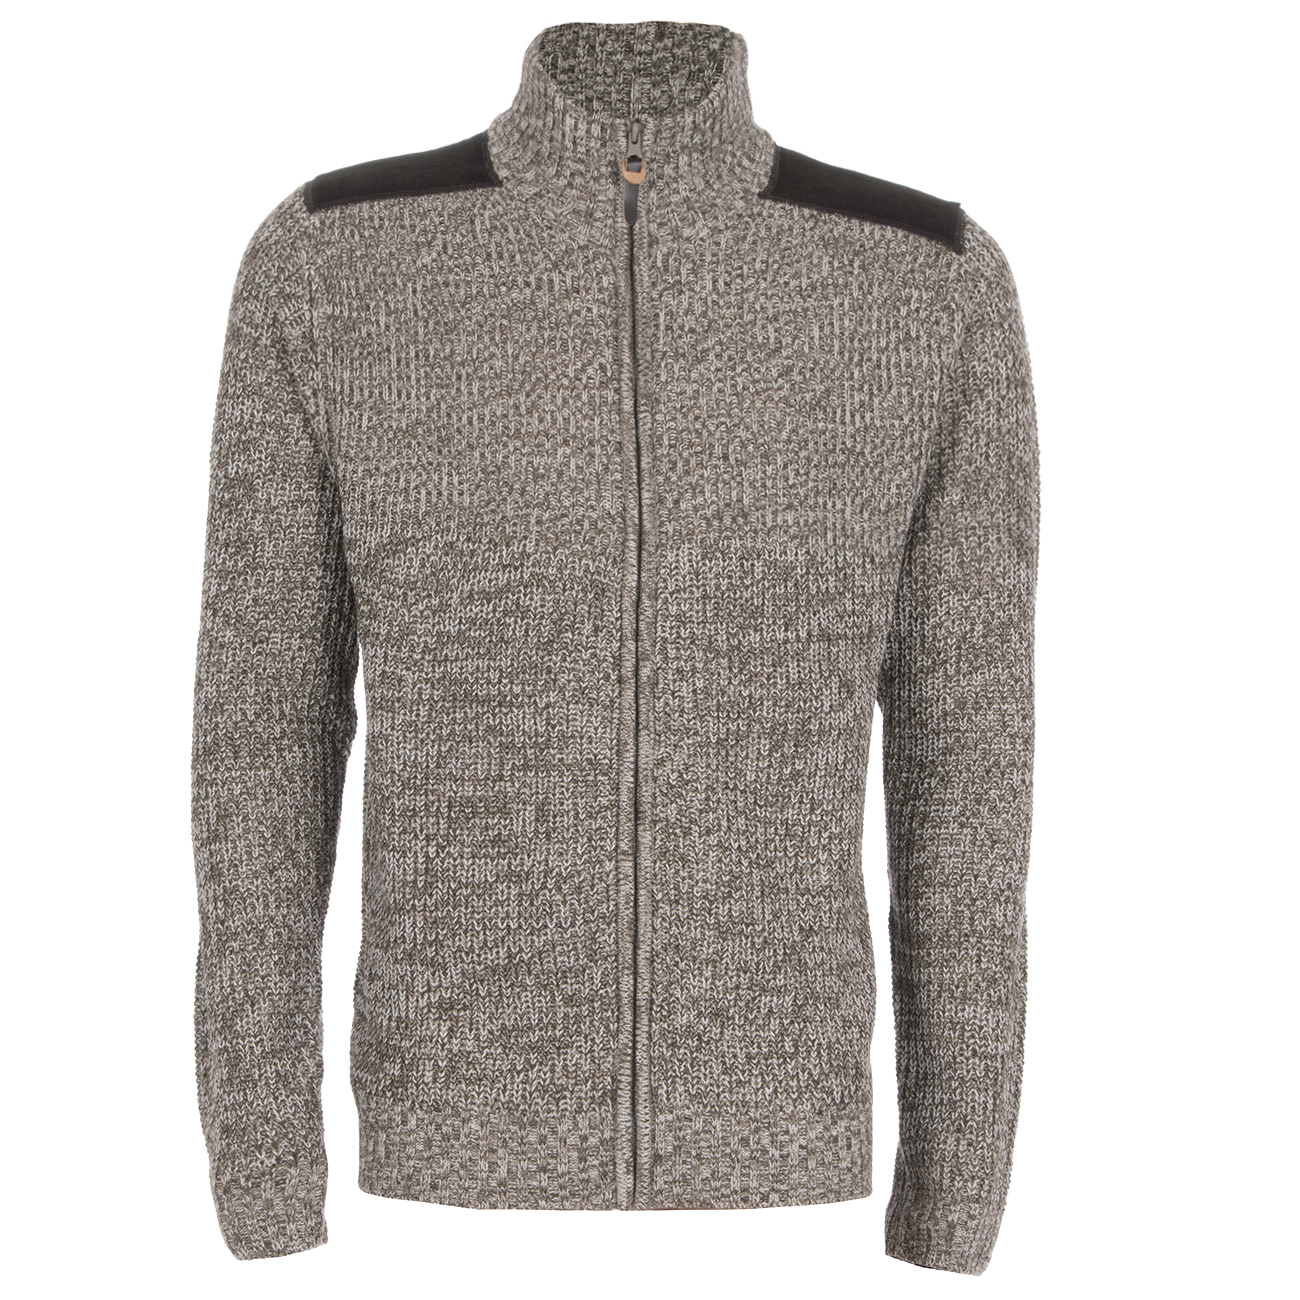 Mens Zipped Cardigan Elegant Style Grey Brown Colour High Stand Collar ...